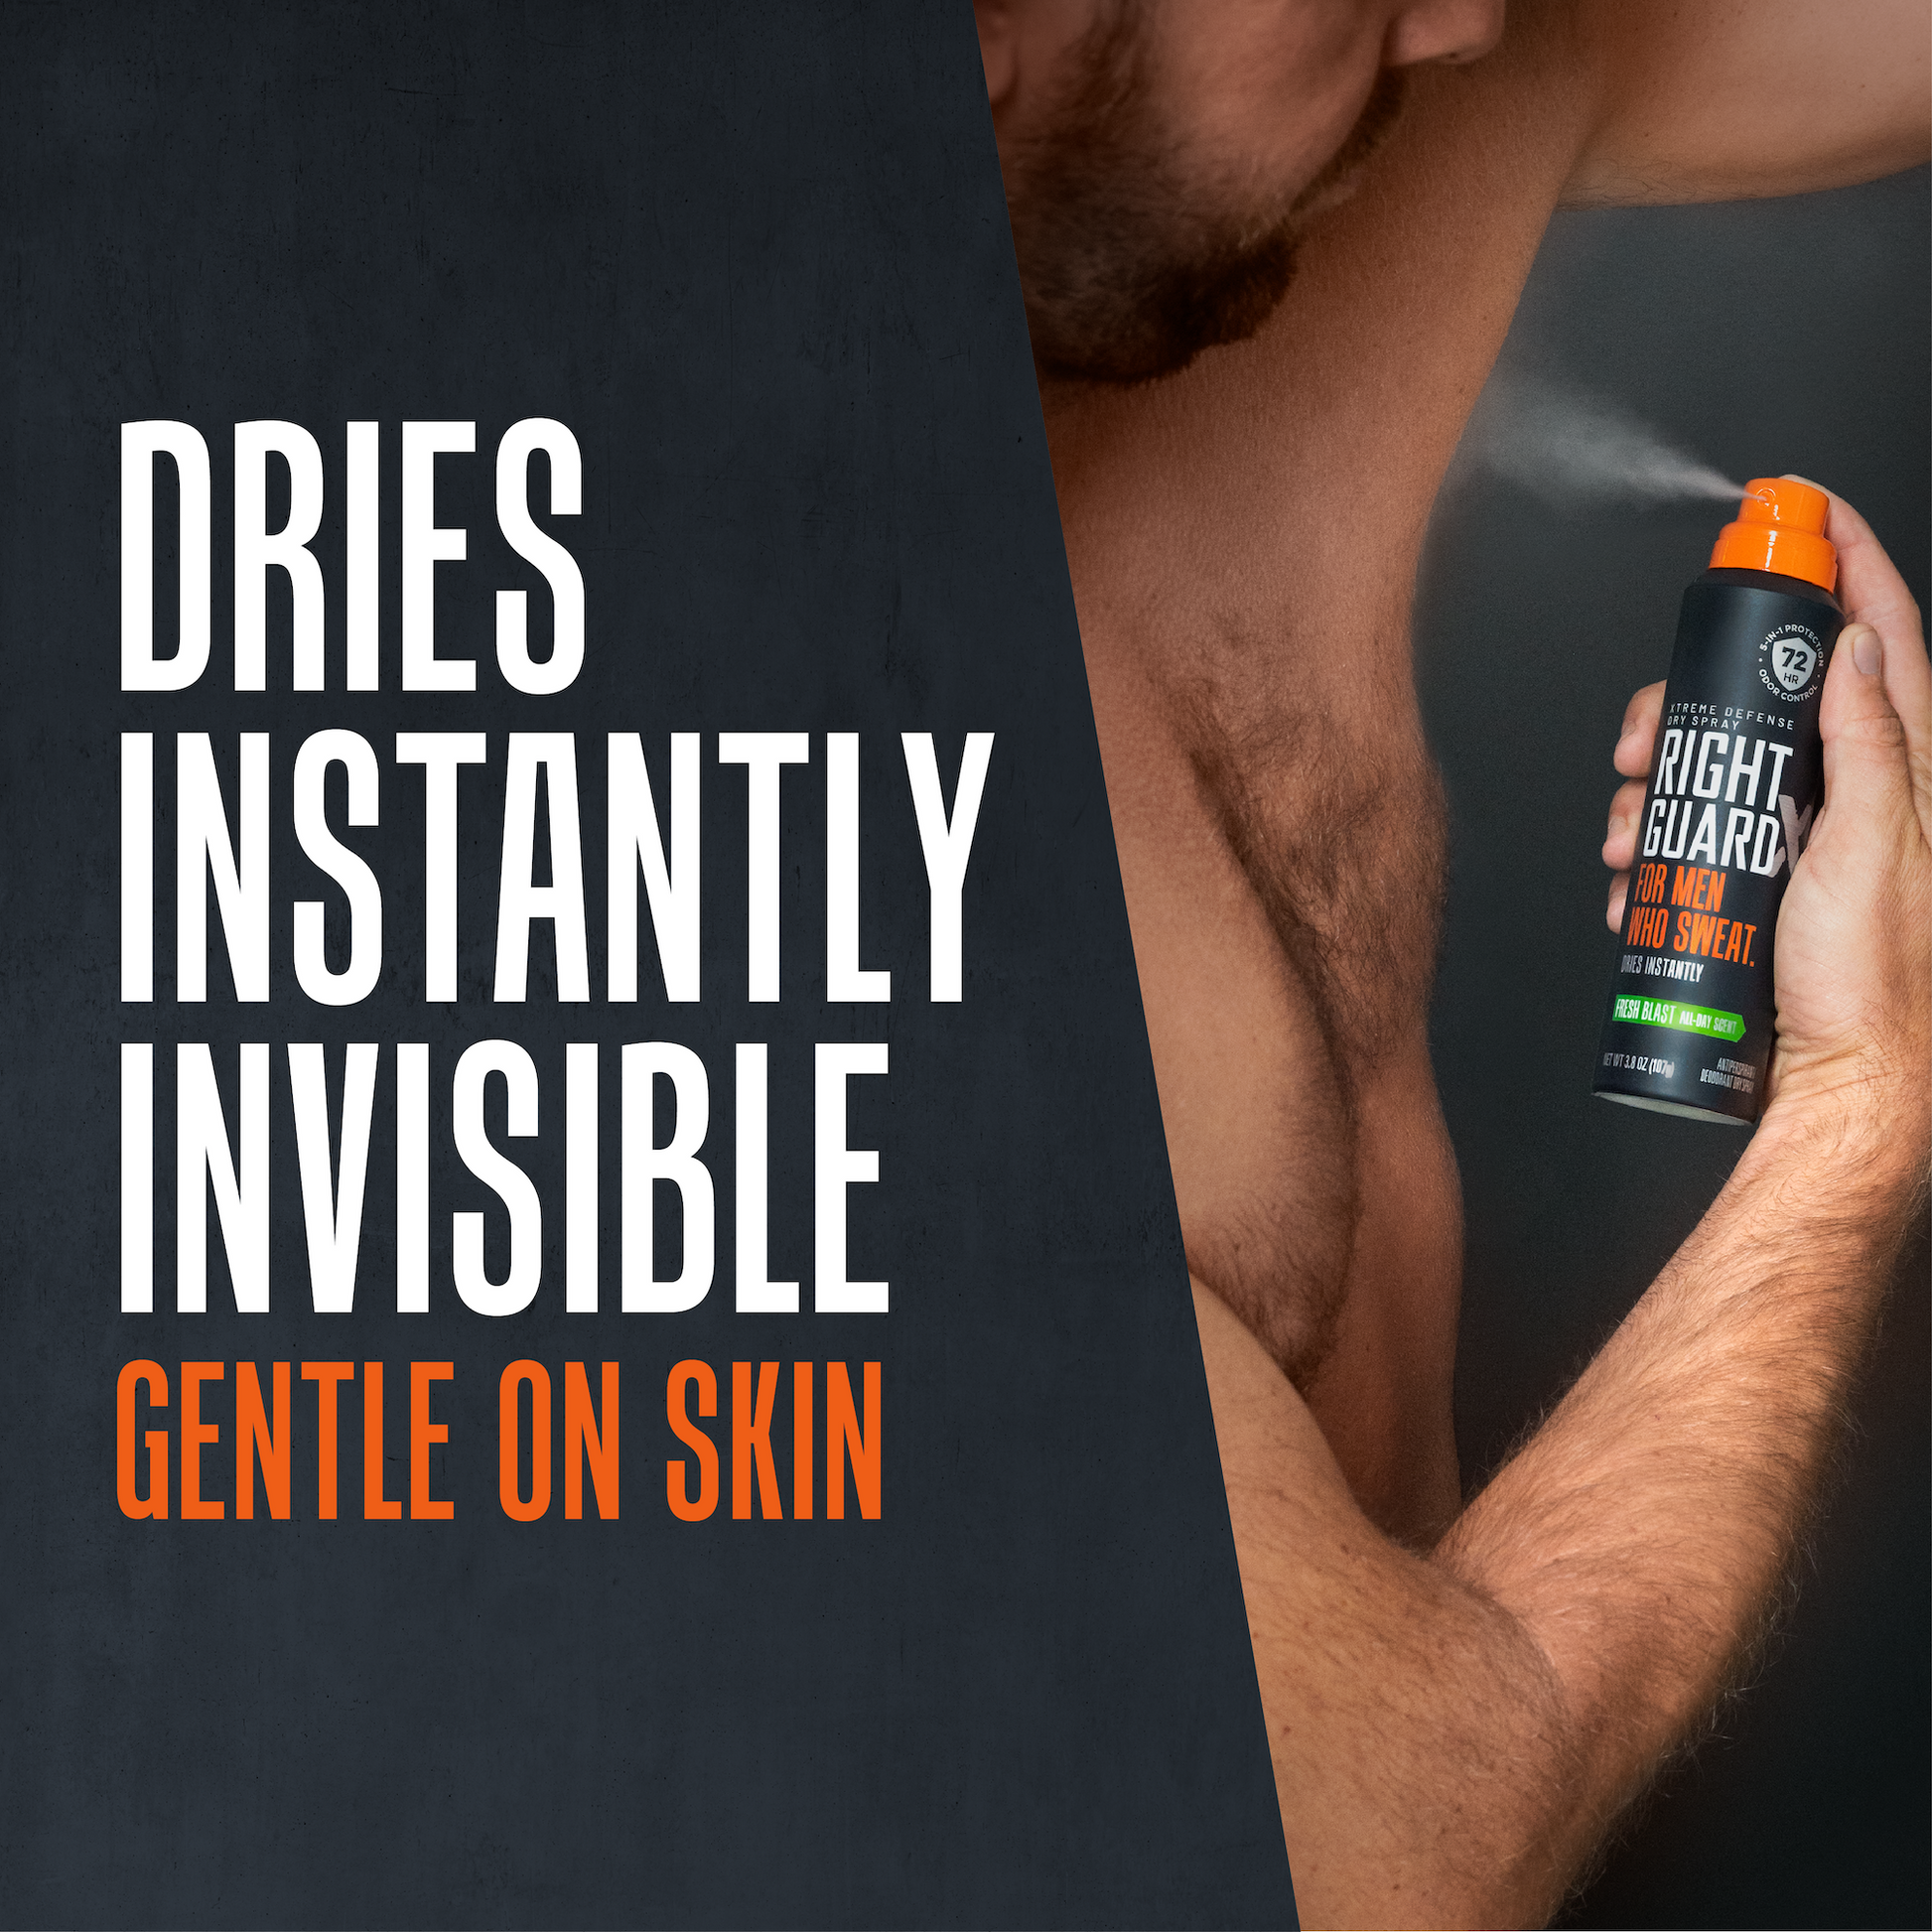 Dries instantly invisible gentle on skin